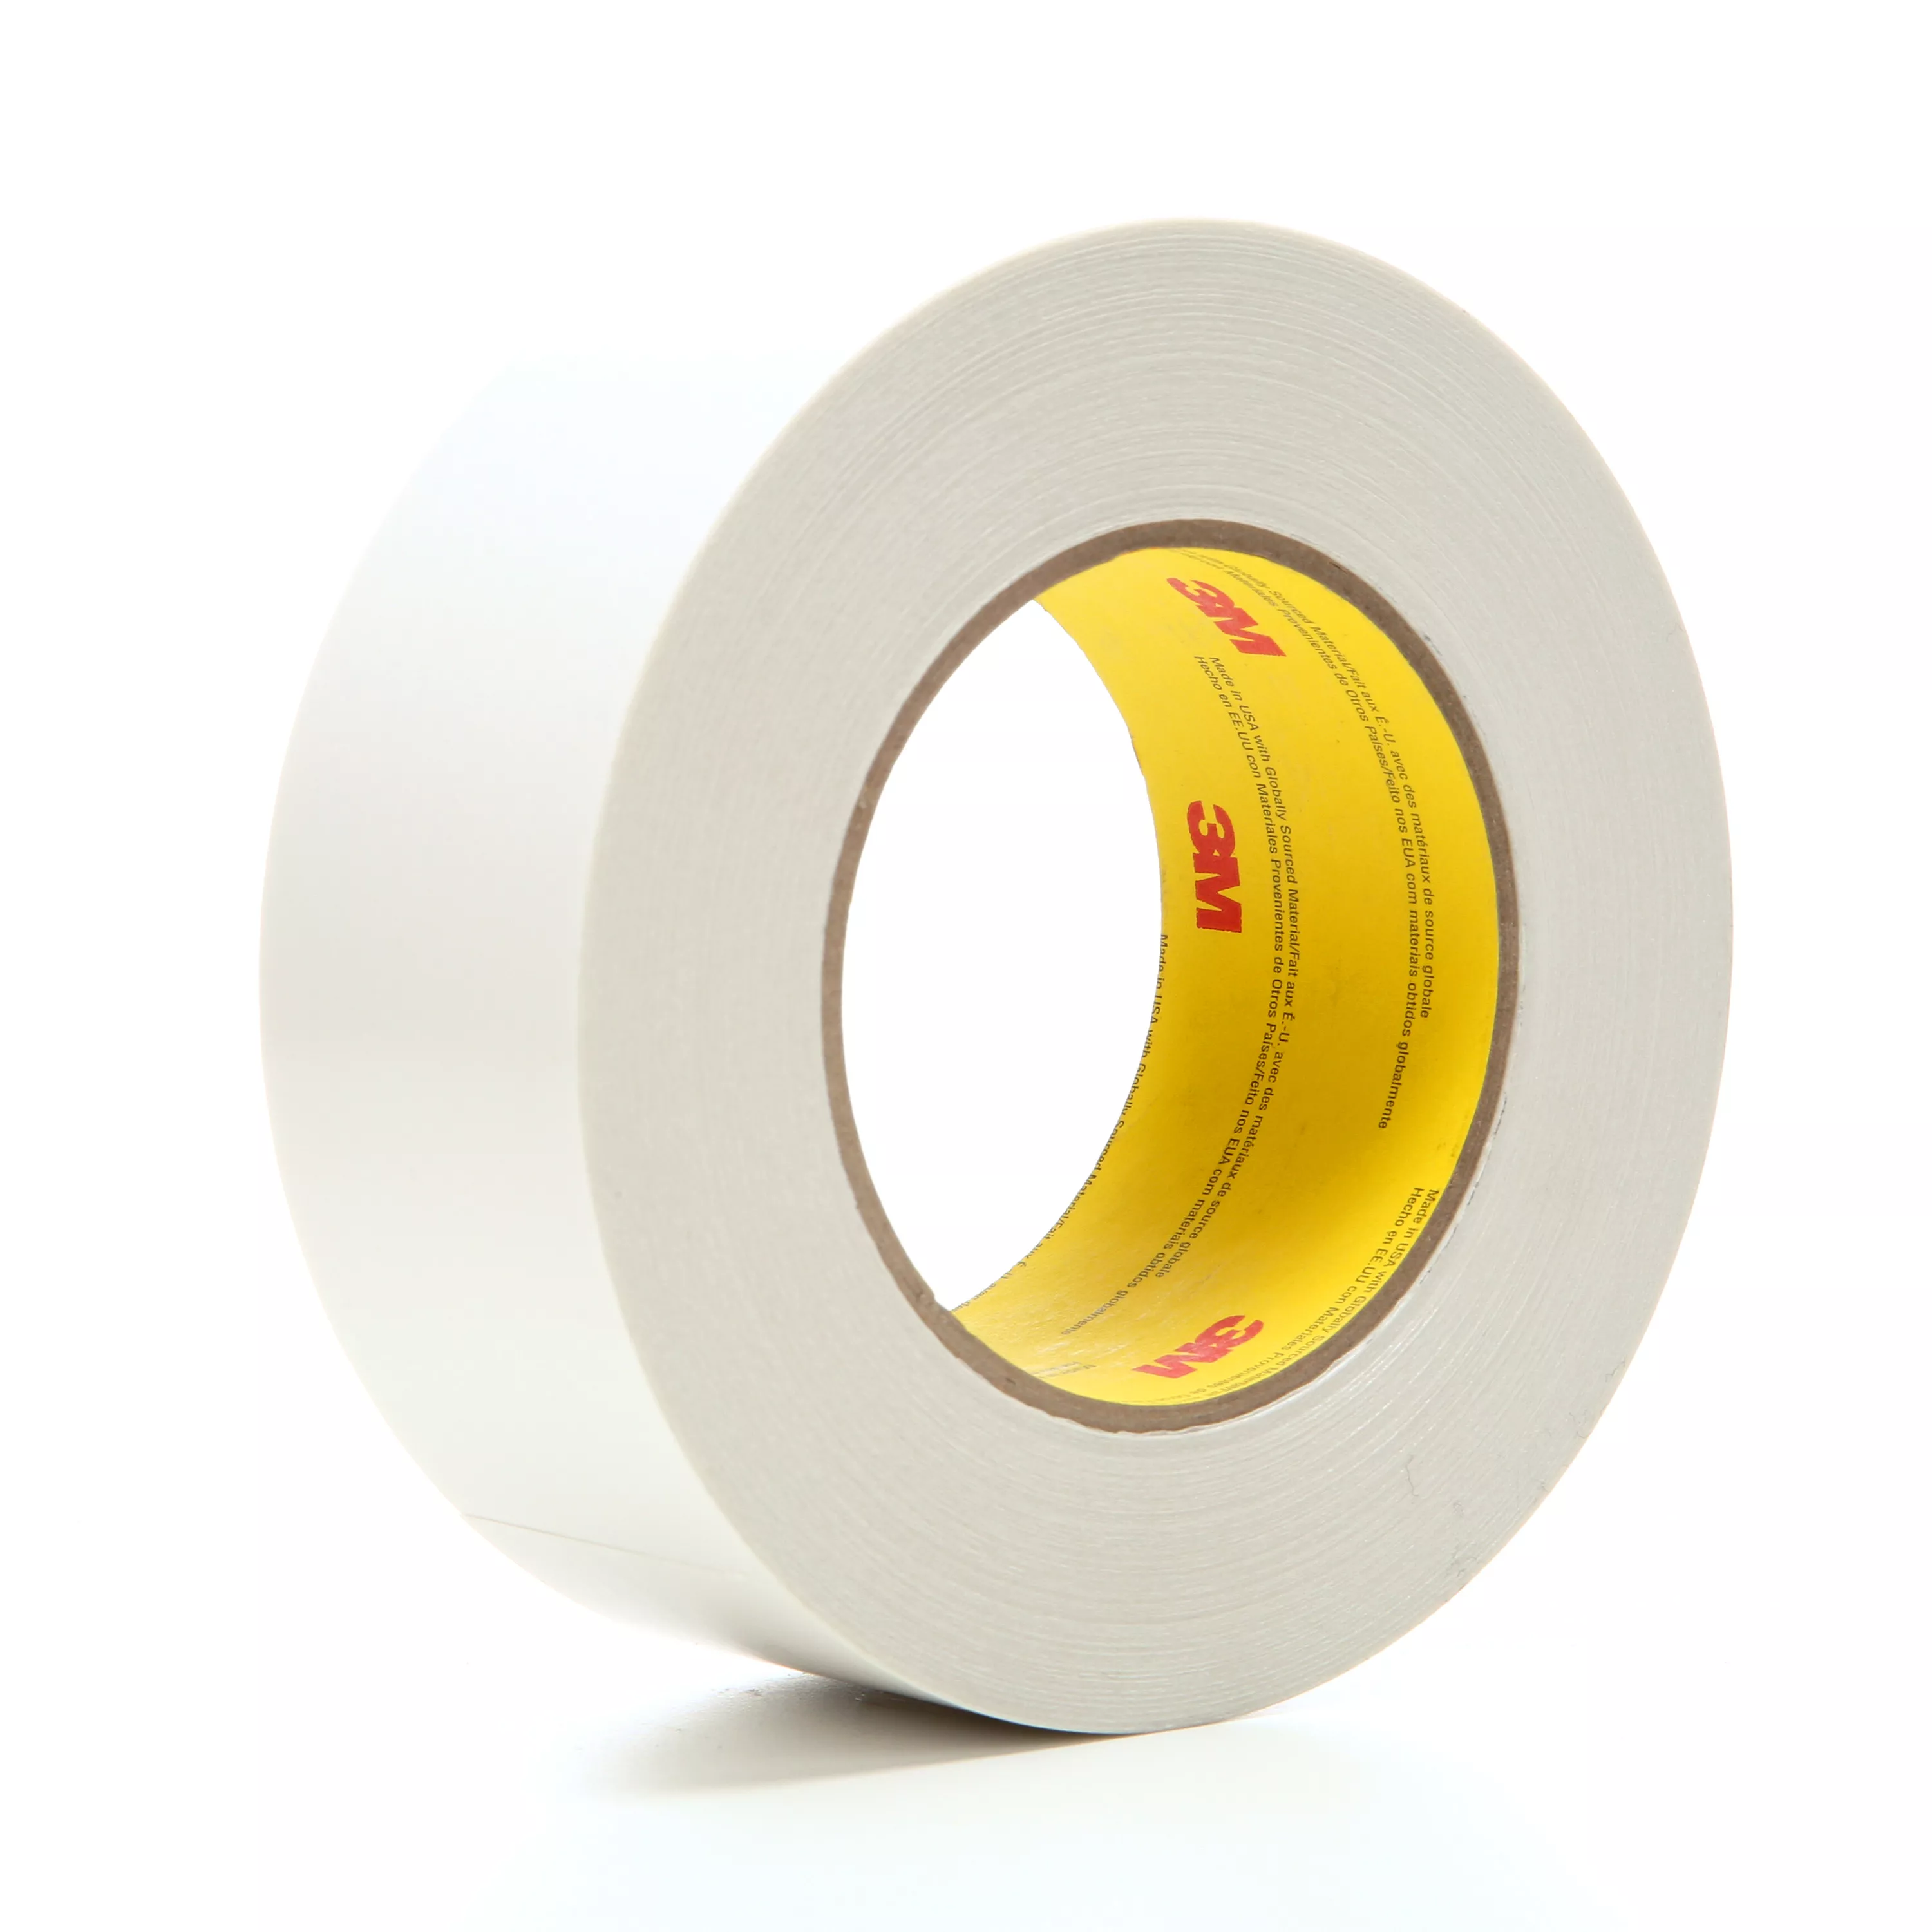 3M™ Double Coated Tape 9738, Clear, 48 mm x 55 m, 4.3 mil, 24 Roll/Case